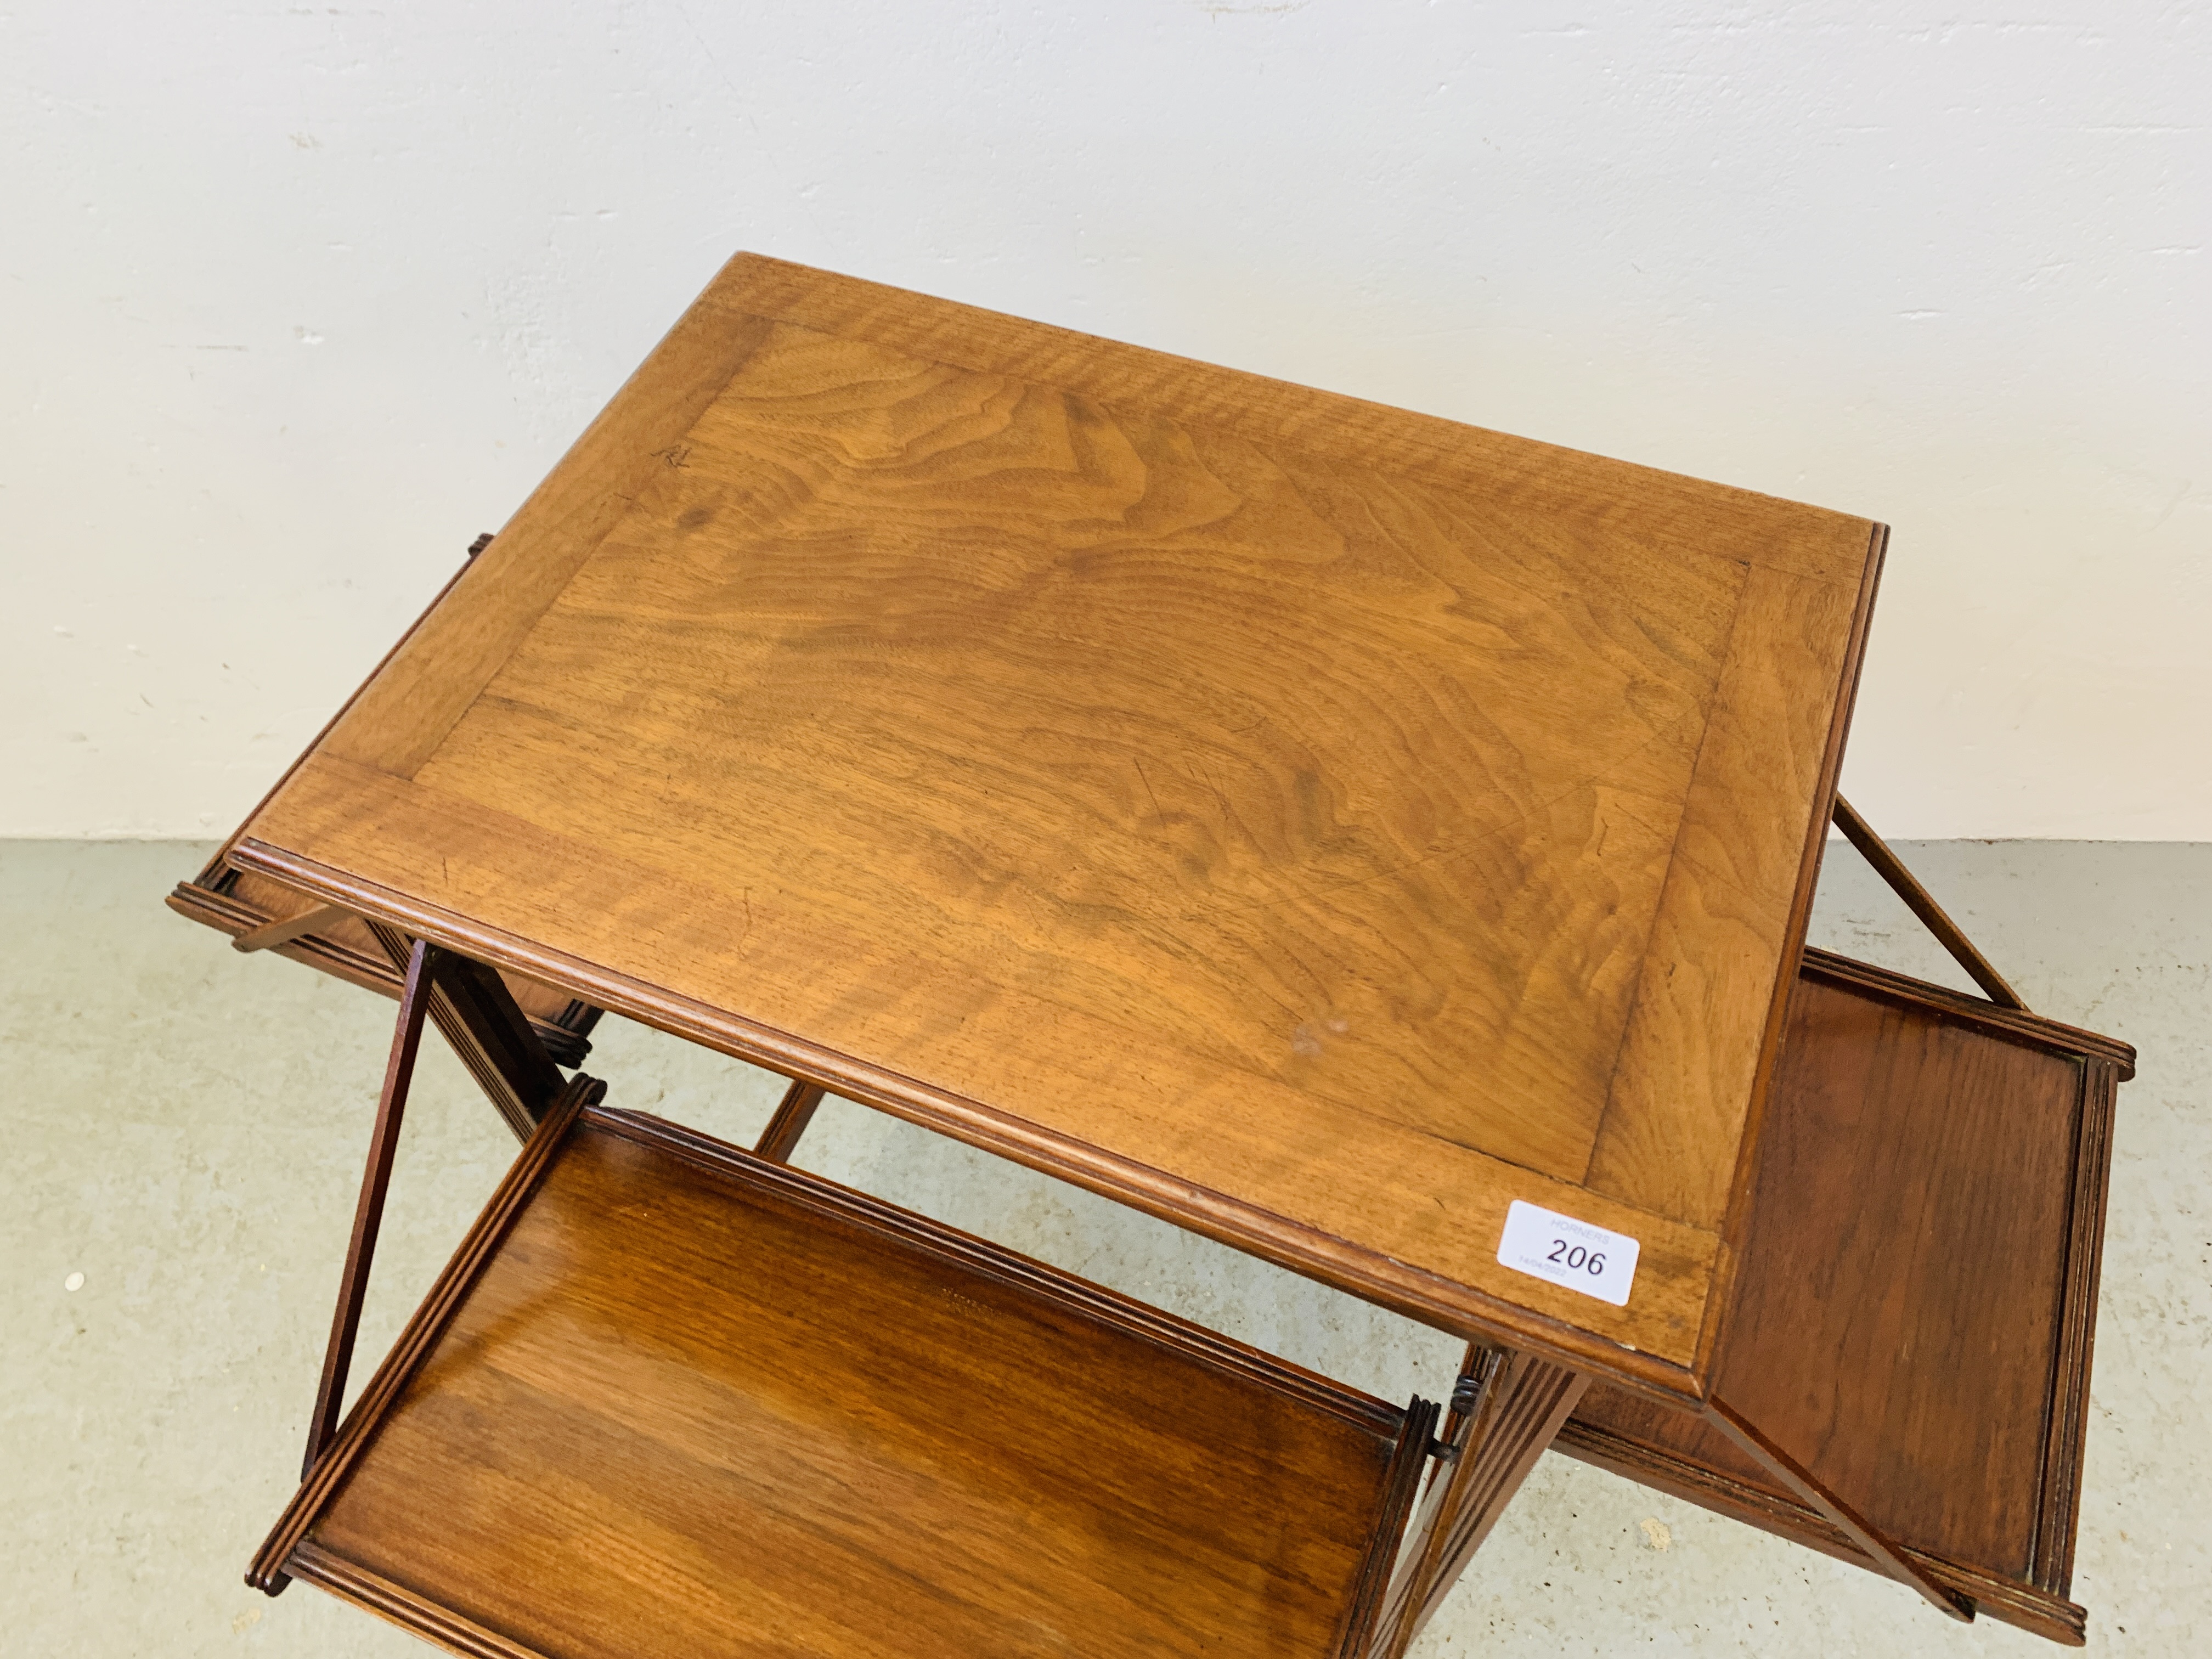 EDWARDIAN MAHOGANY OCCASIONAL TABLE WITH CANTILEVER TRAYS. - Image 3 of 5